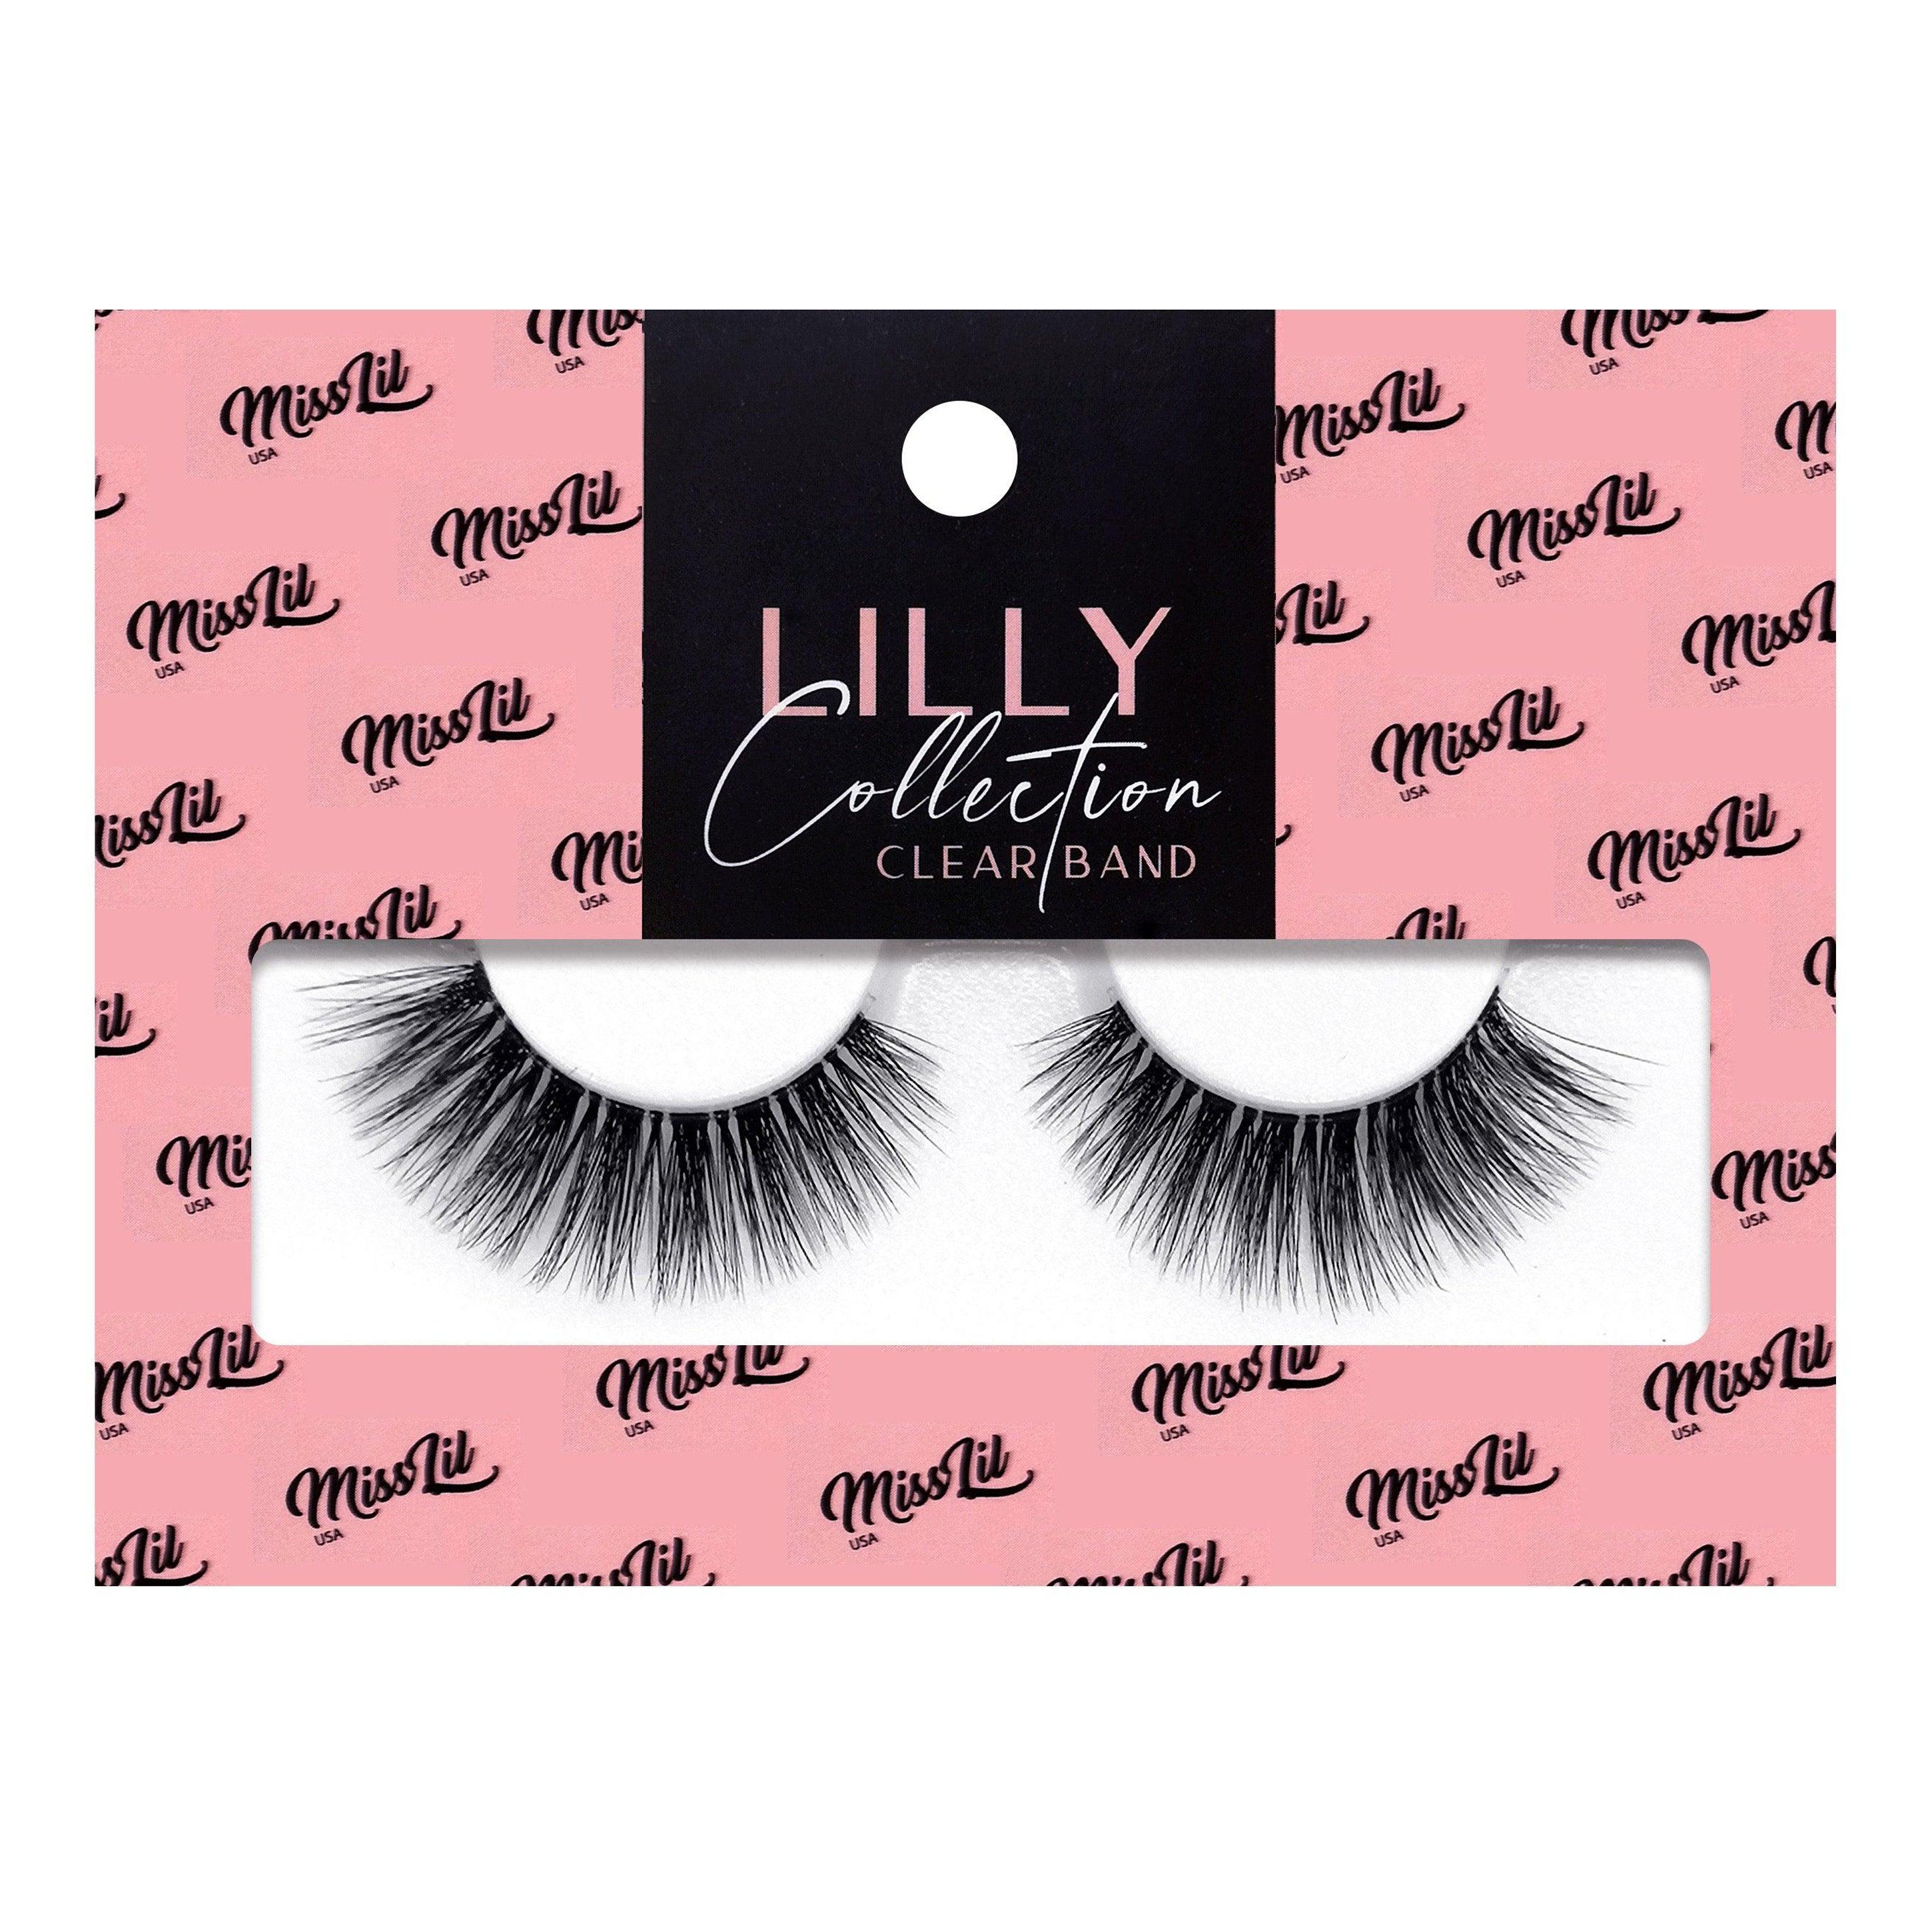 1-Pair Lashes-Lilly Collection #4 (Pack of 12) - Miss Lil USA Wholesale